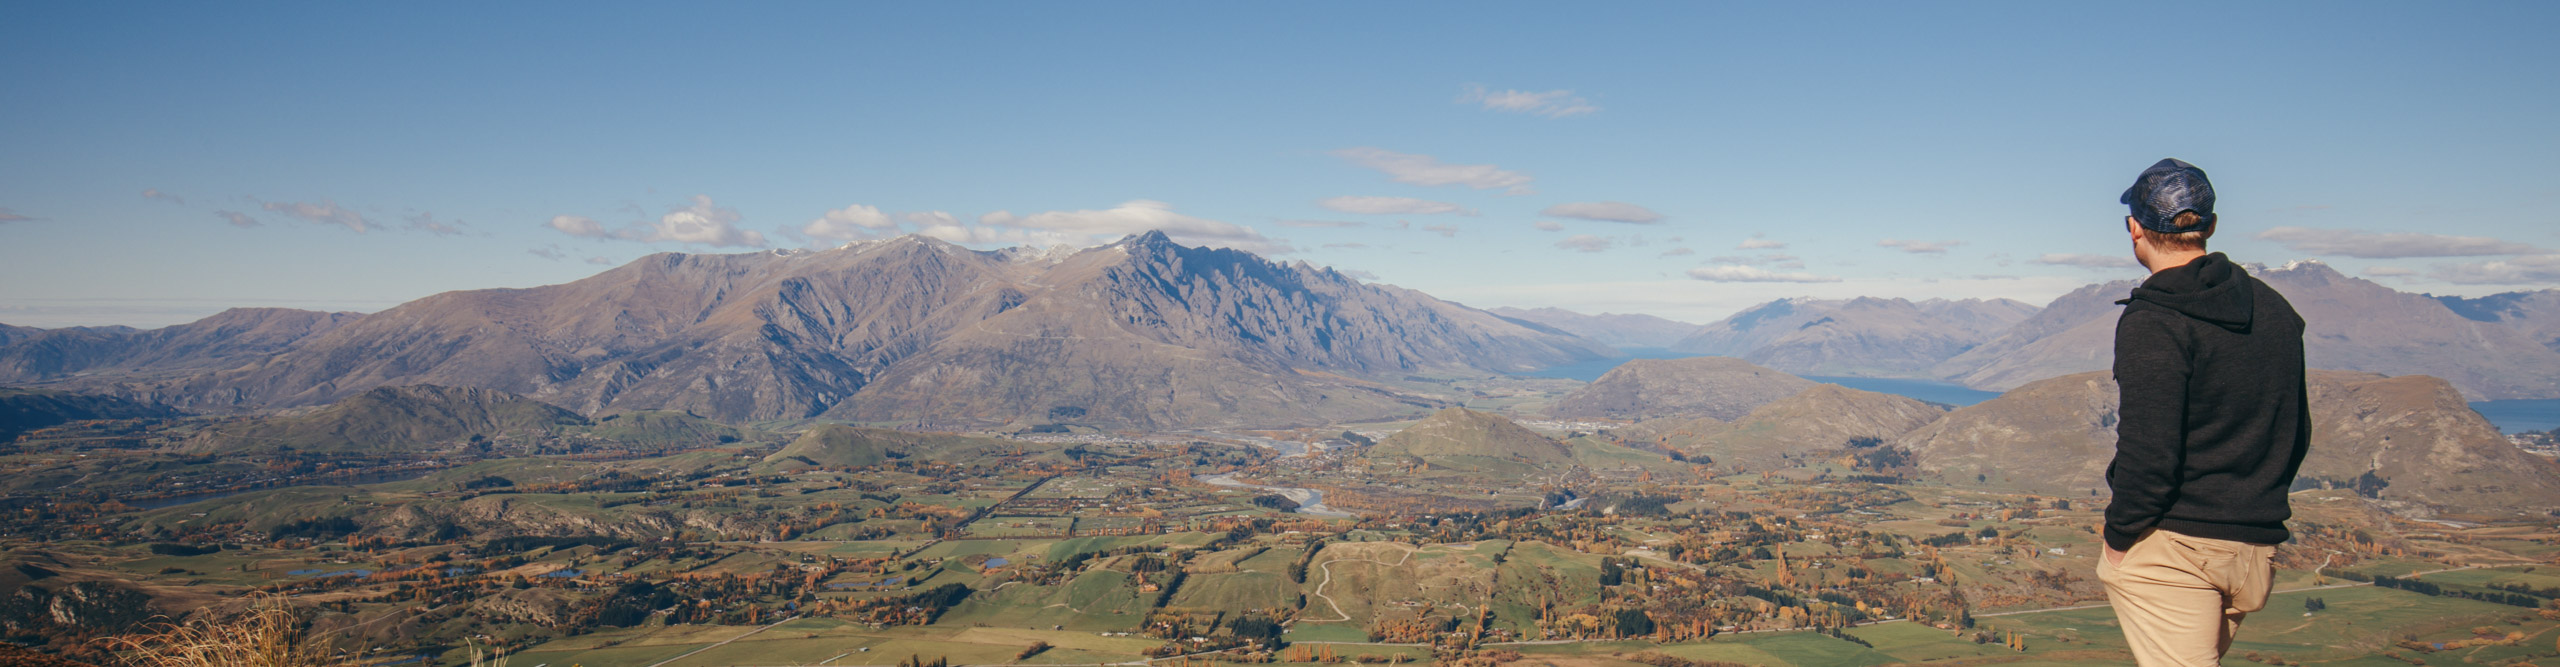 Traveller looking out at Queenstown, New Zealand